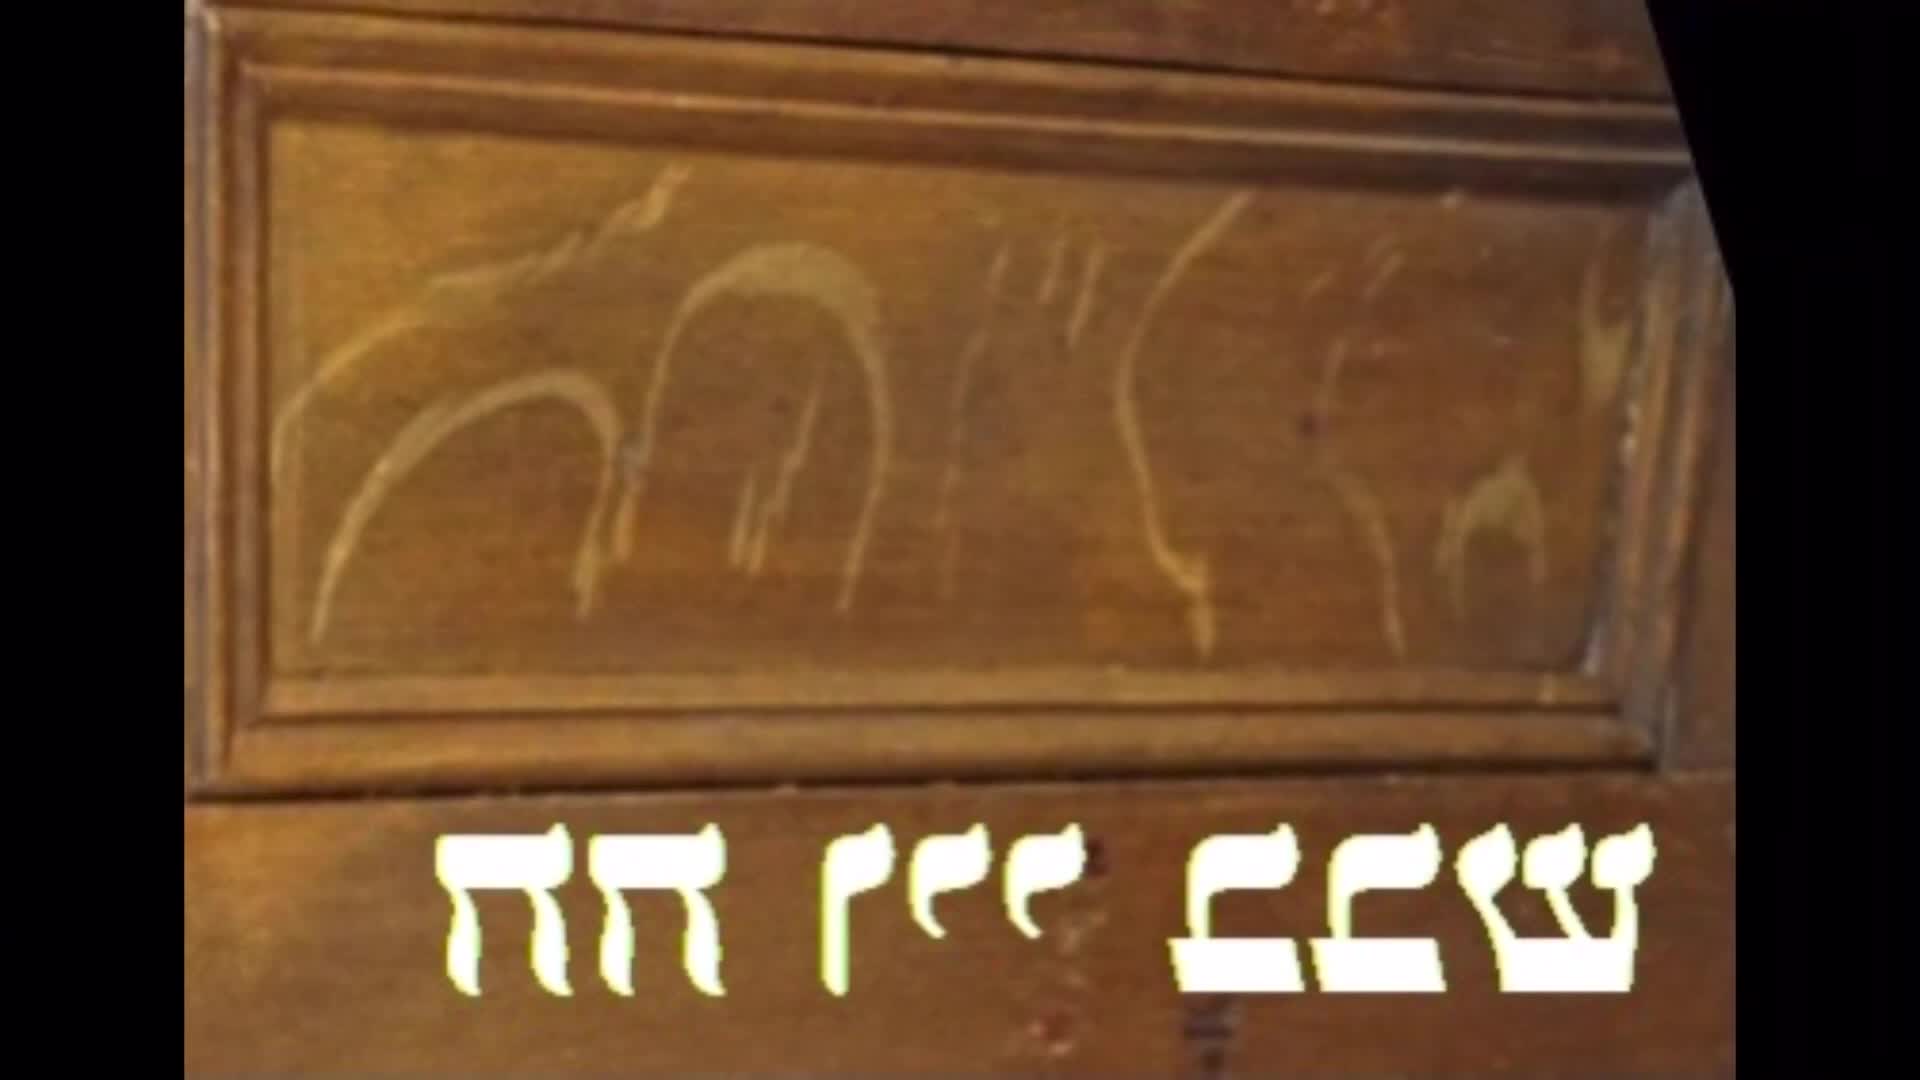 Hebrew On The Pews? Taking A Closer Look At The Claim Part 1